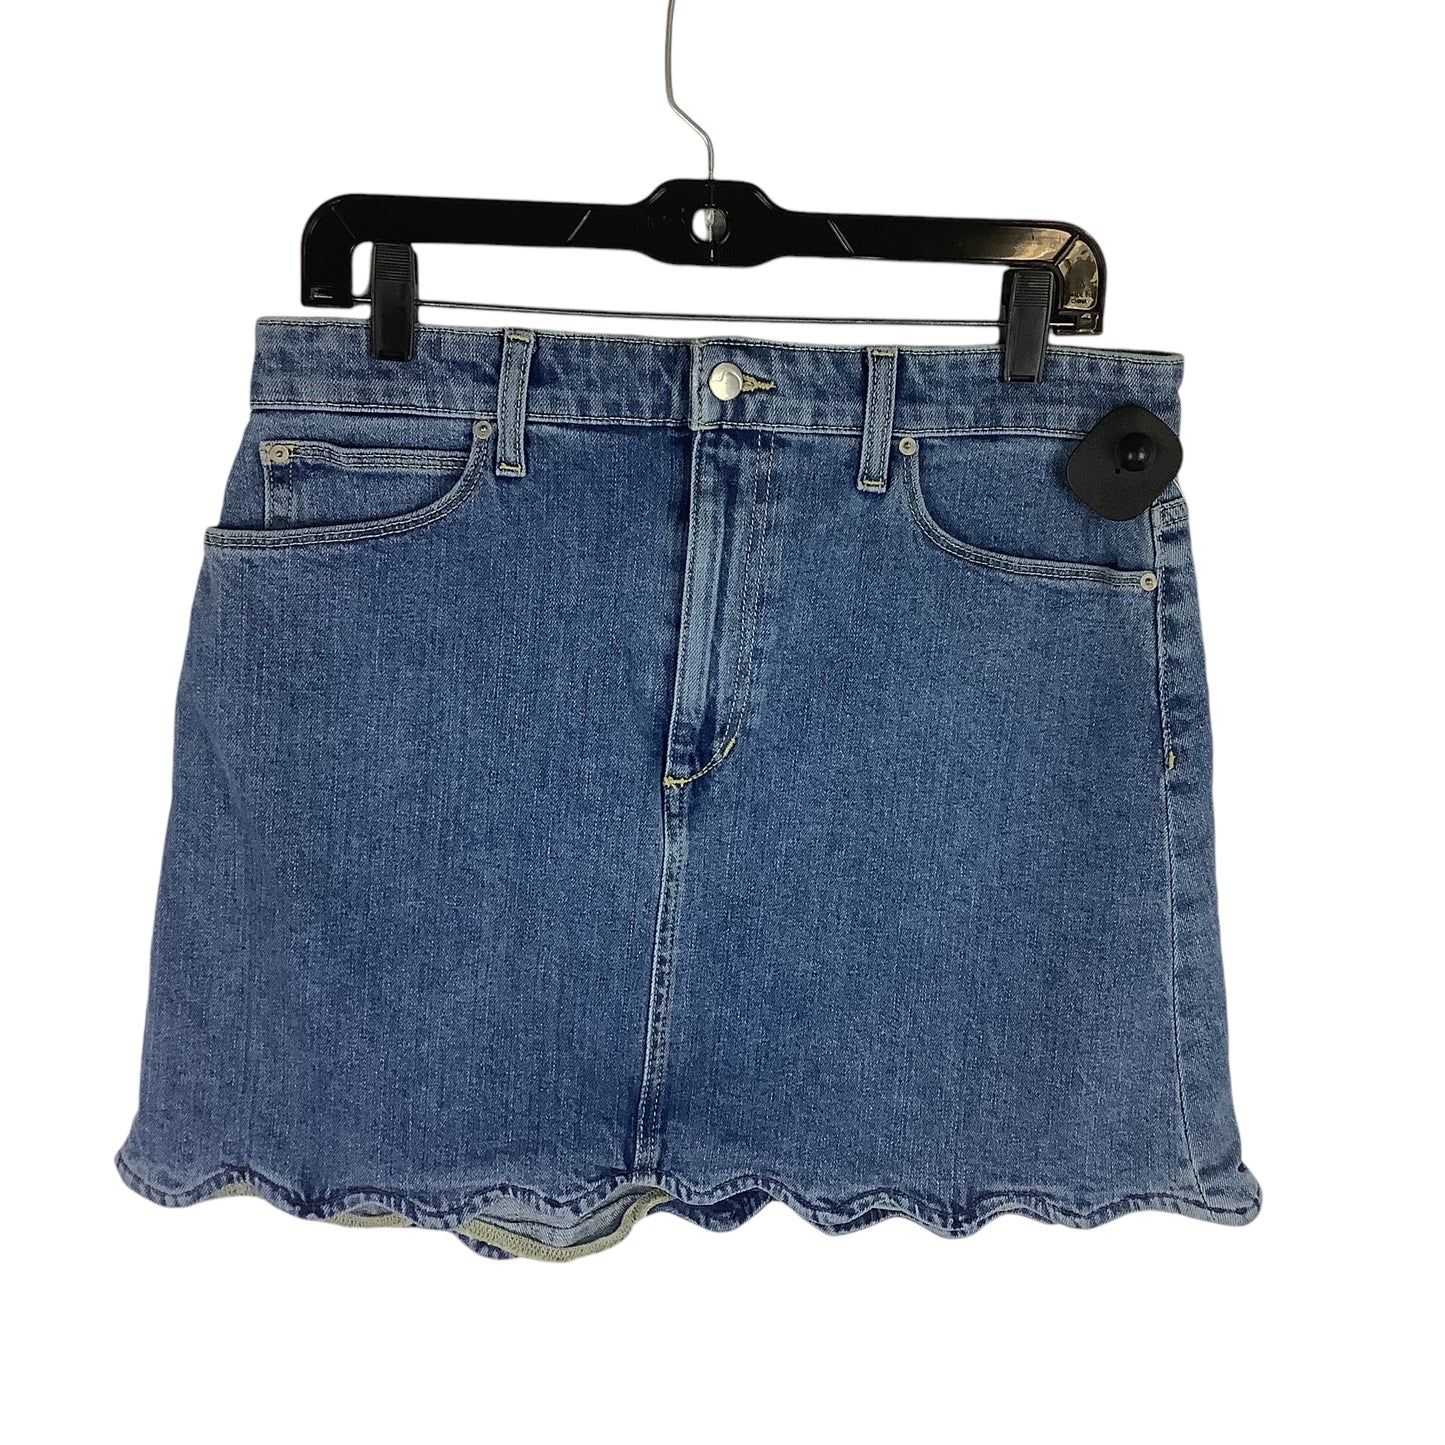 Skirt Designer By Joes Jeans  Size: 6 (29)